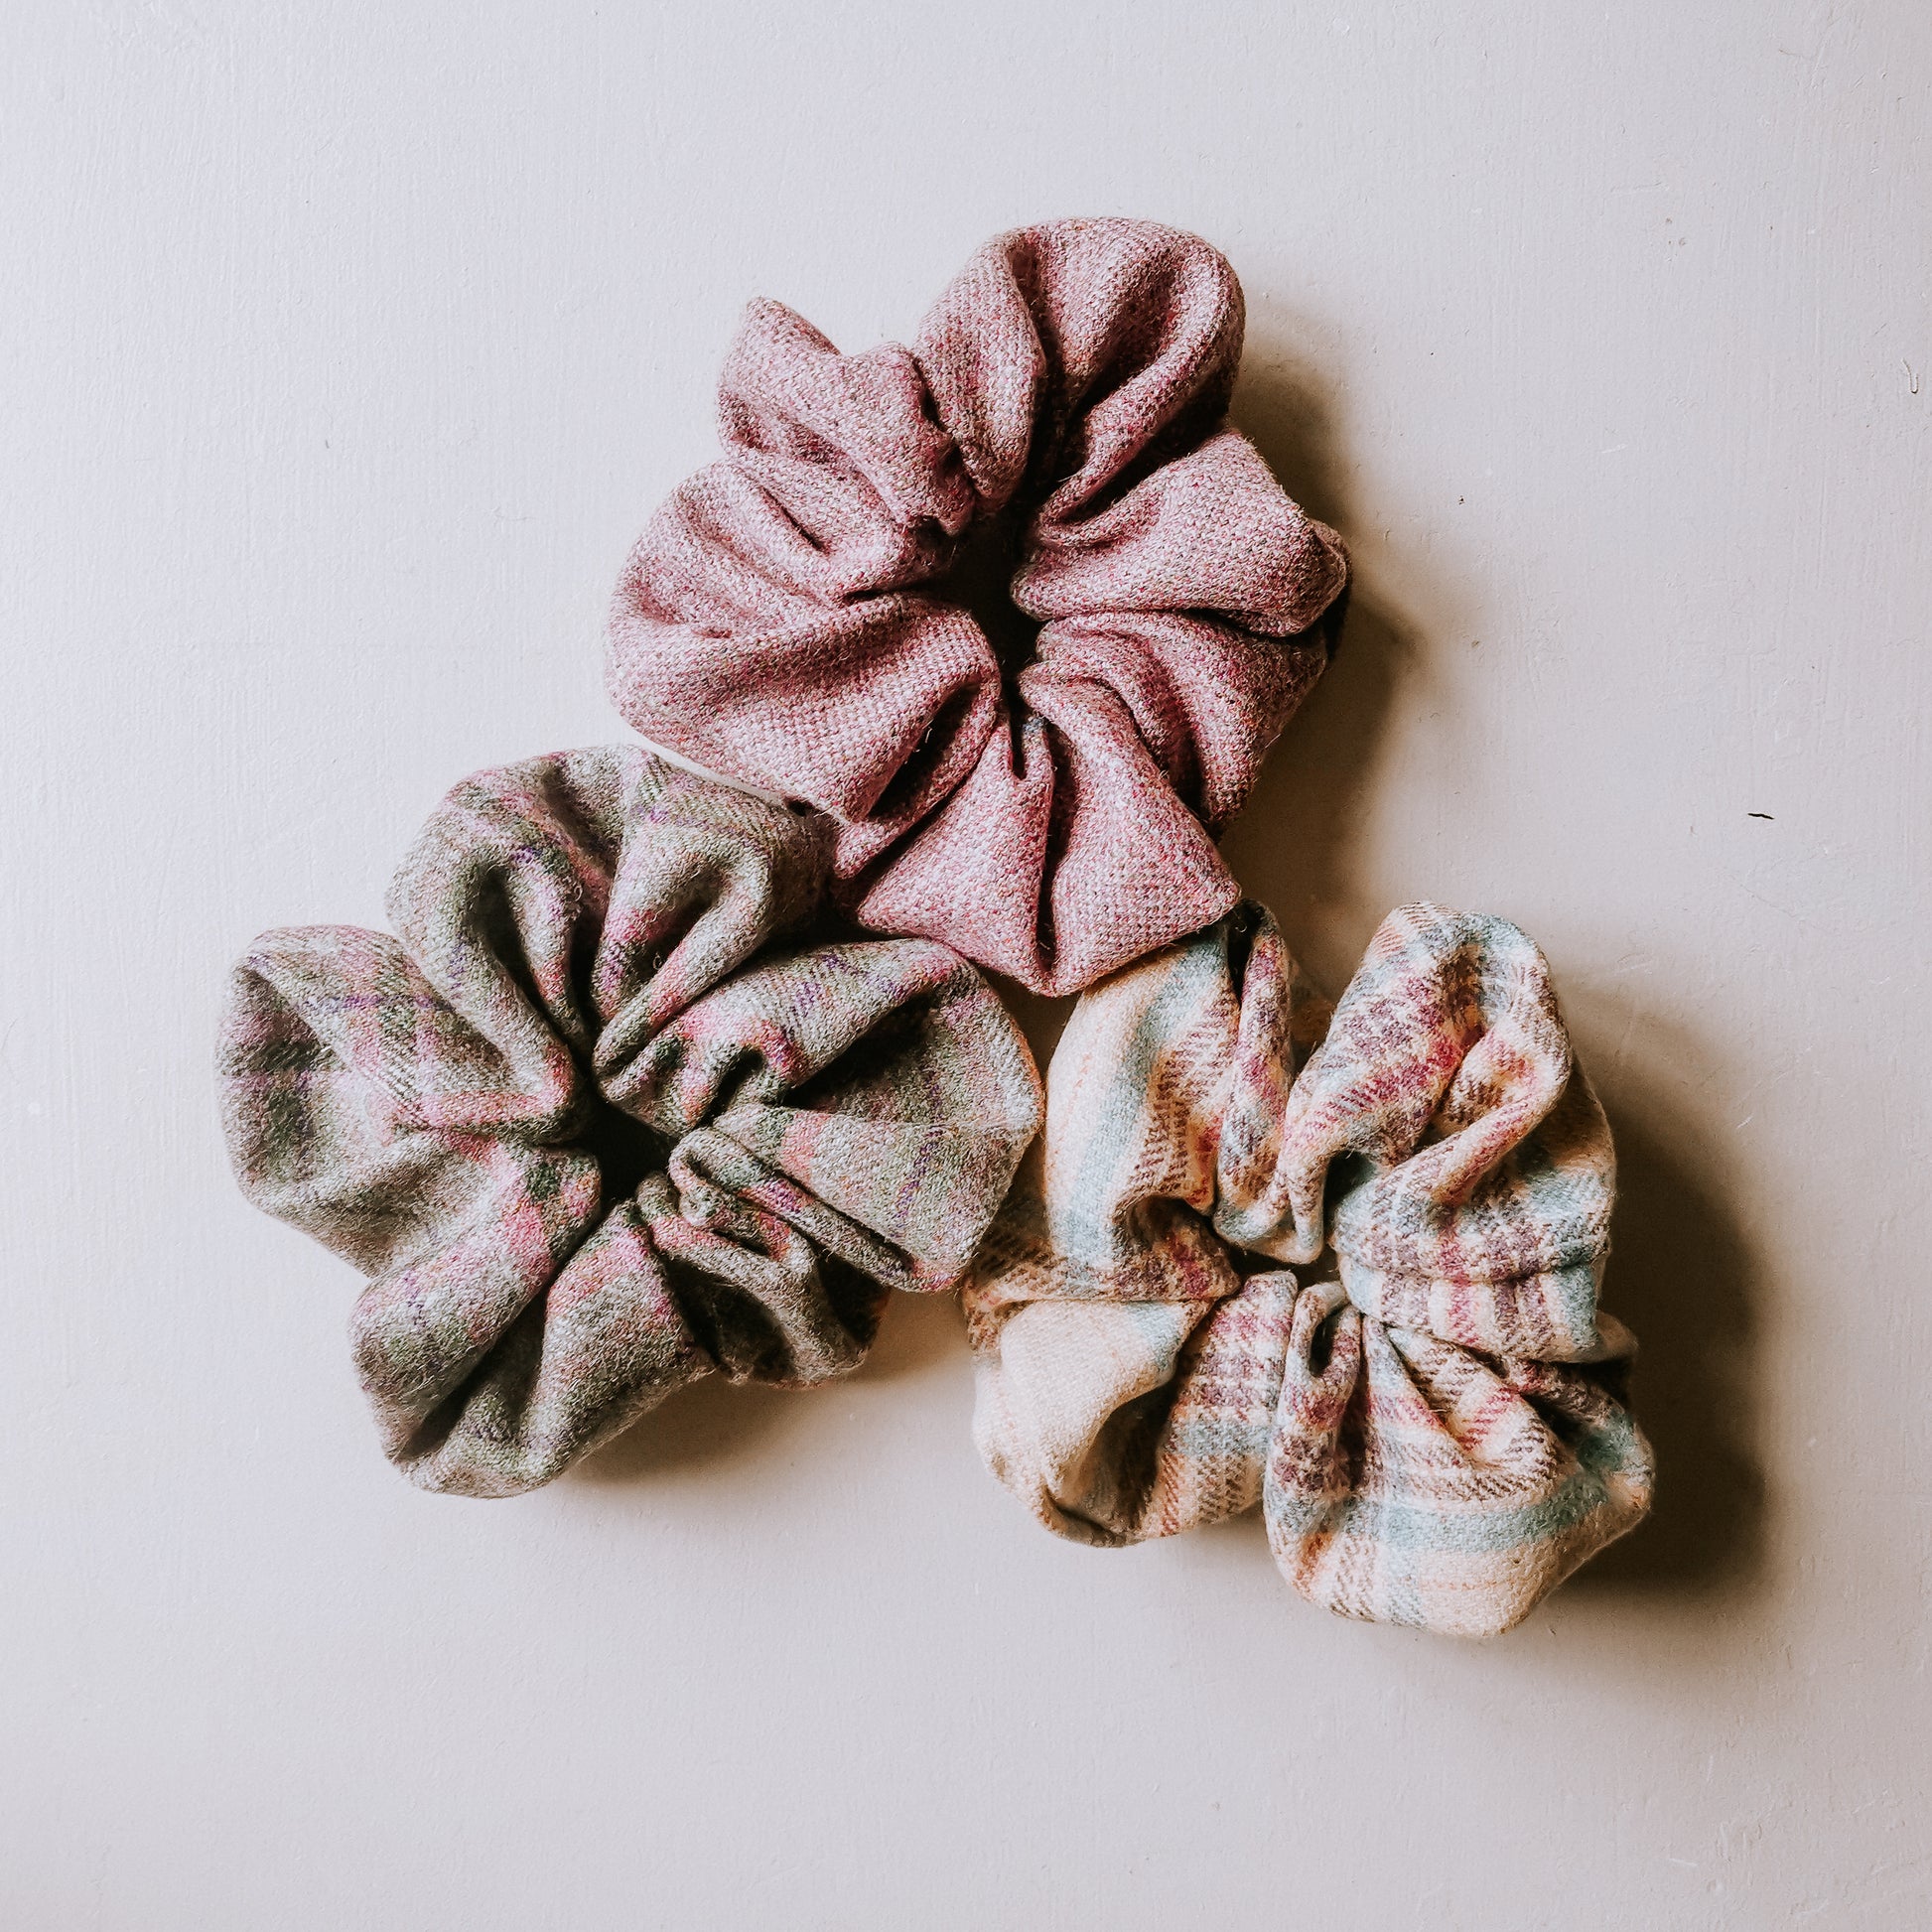 Pastel Coloured Tweed Scrunchie by F&B - Handmade in Yorkshire from pastel tweed shades